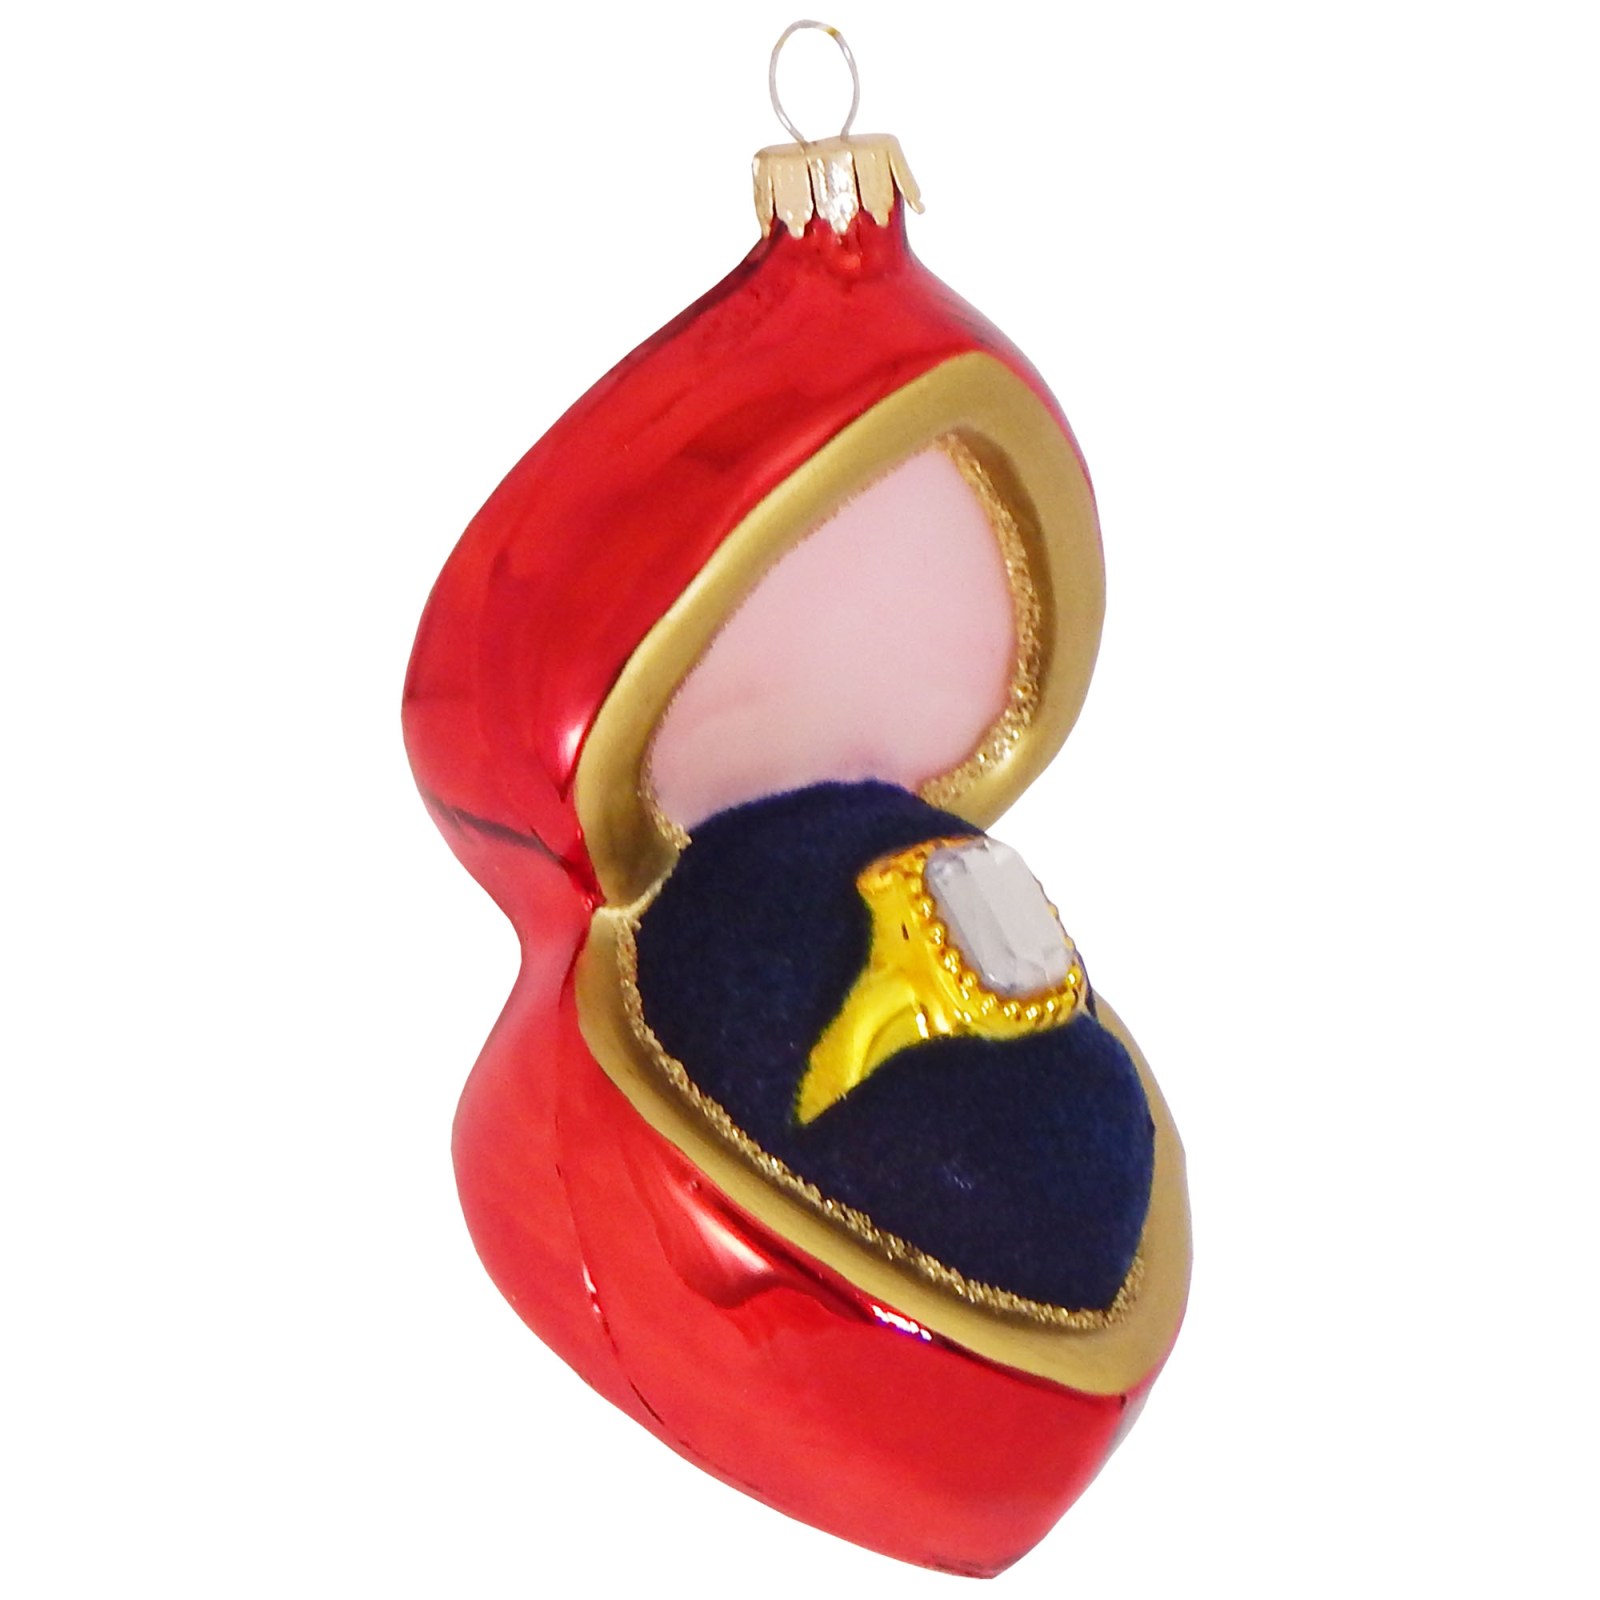 Christmas by Krebs Engagement Ring in Heart Shaped Box Christmas Holiday Ornament Glass